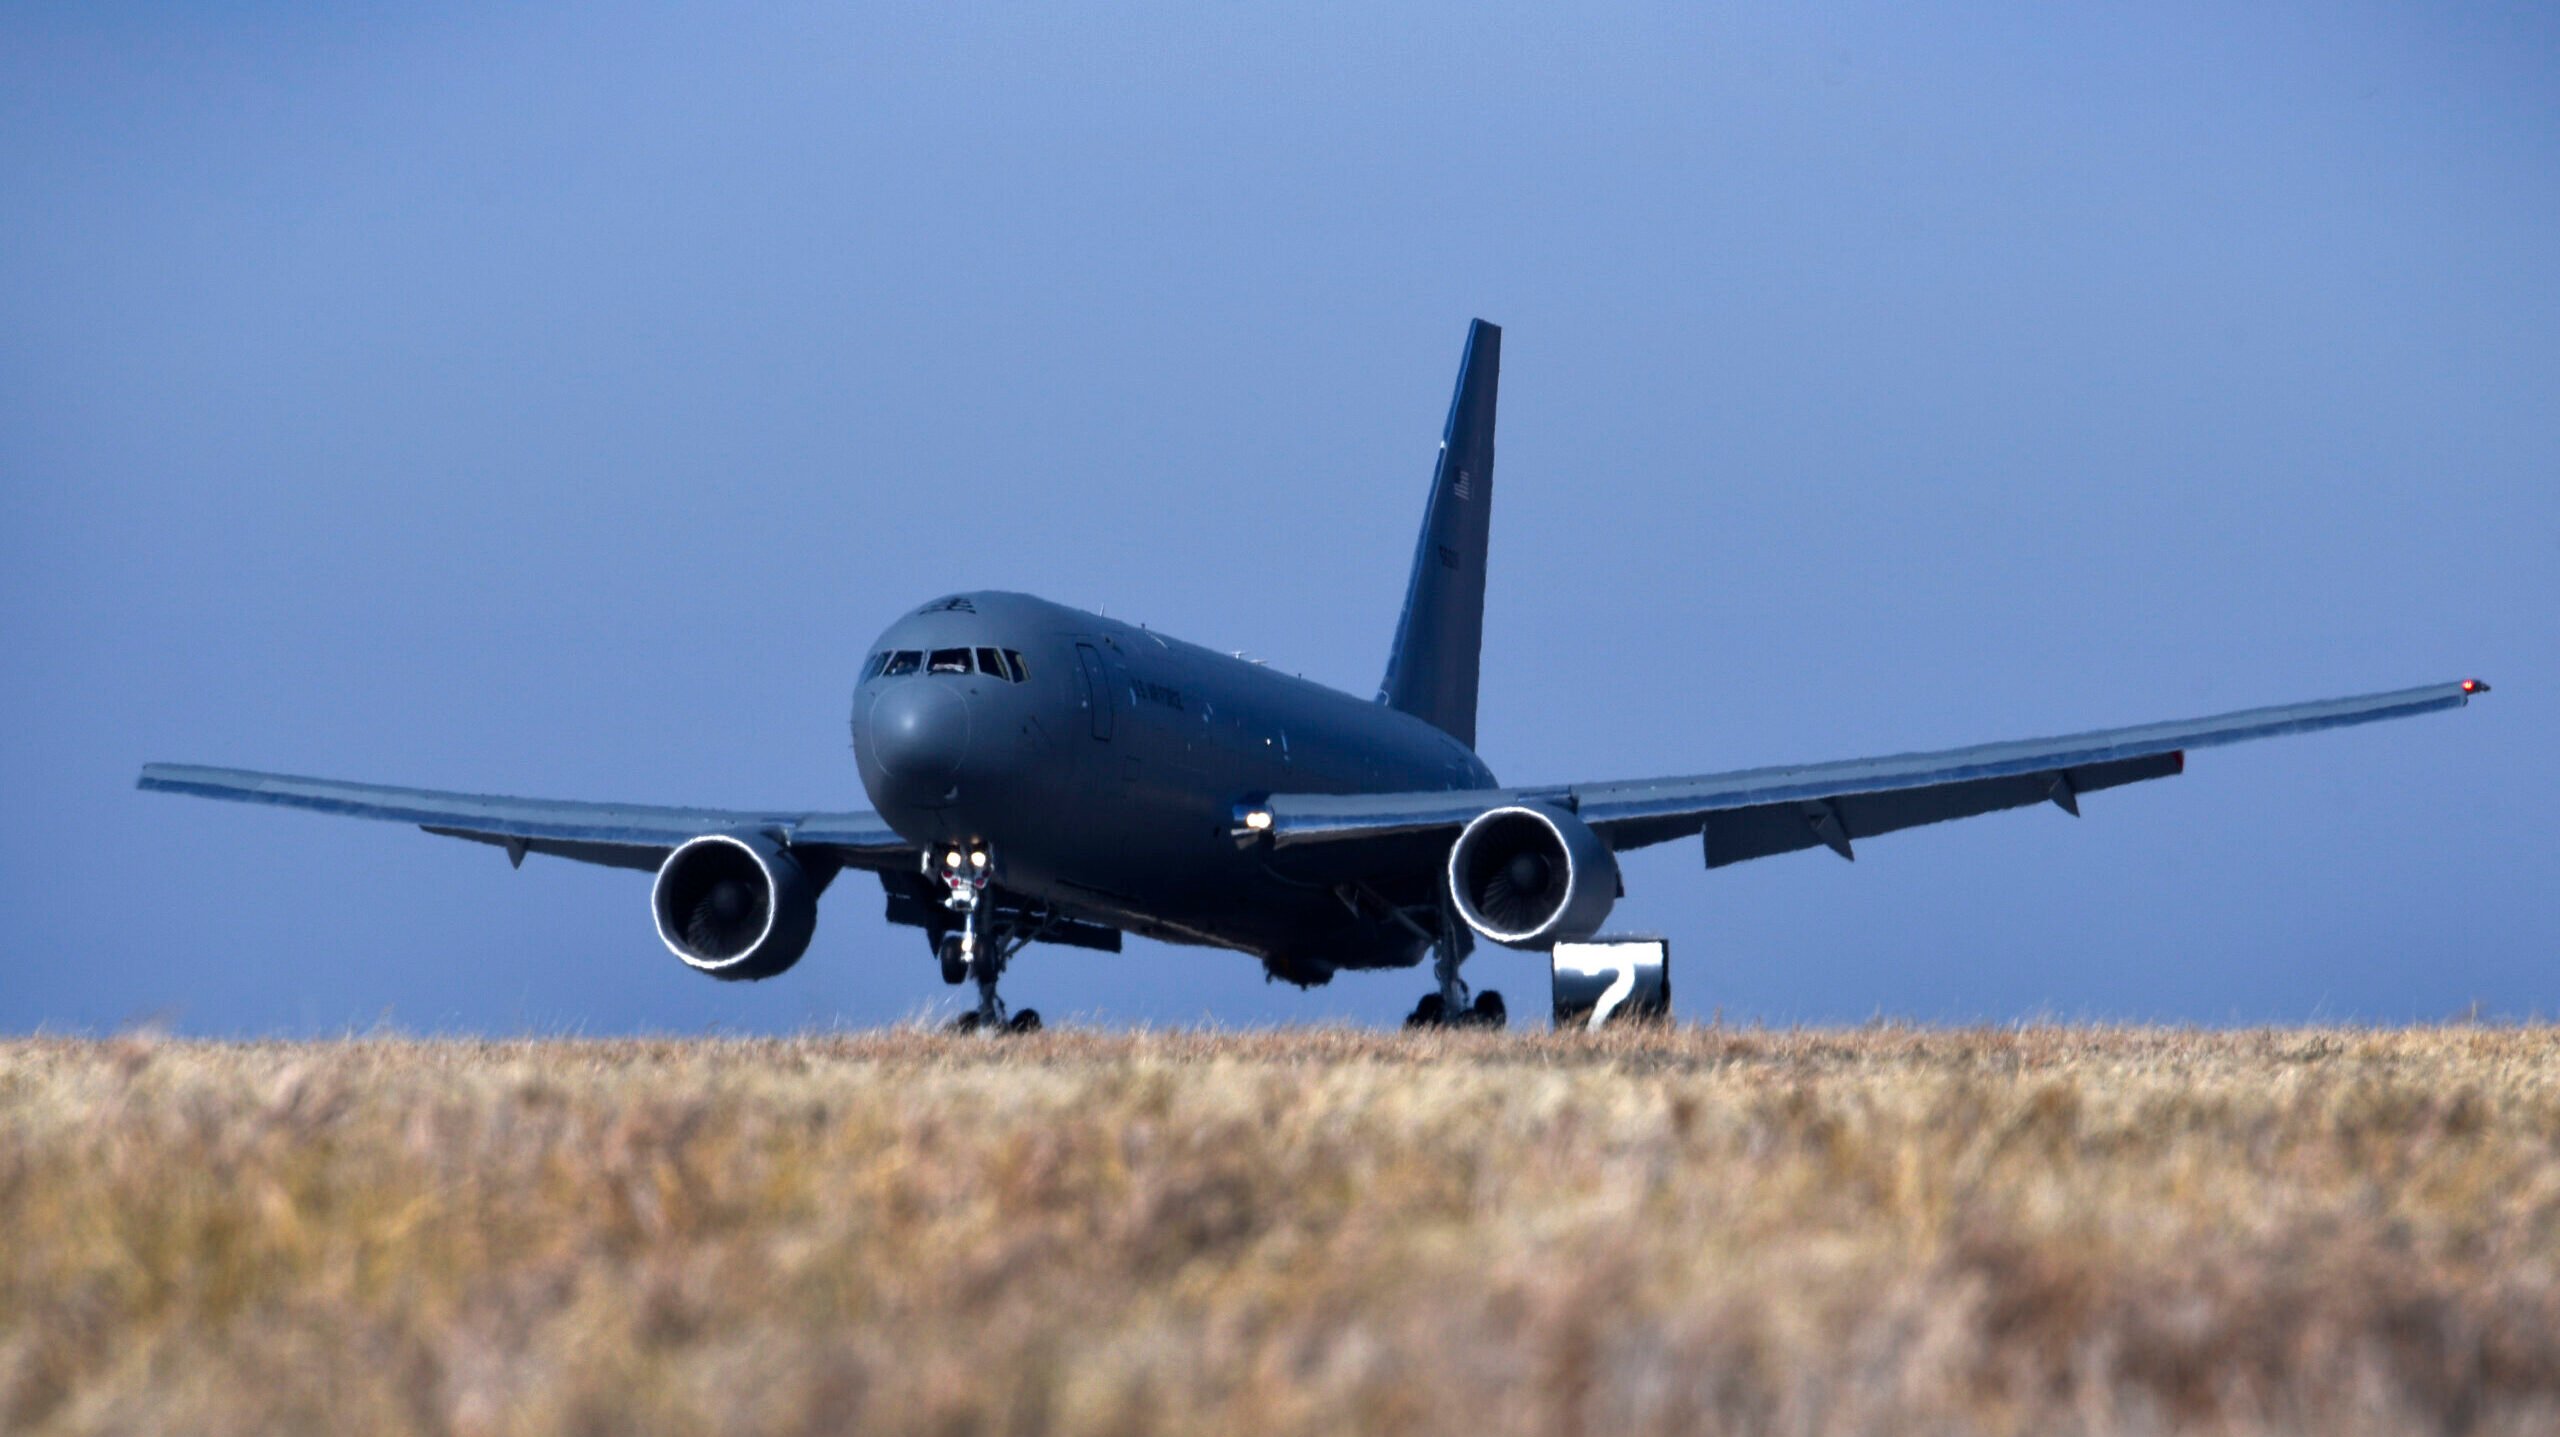 KC-46A tanker still has 6 category 1 deficiencies, but fixes are in the works: USAF official